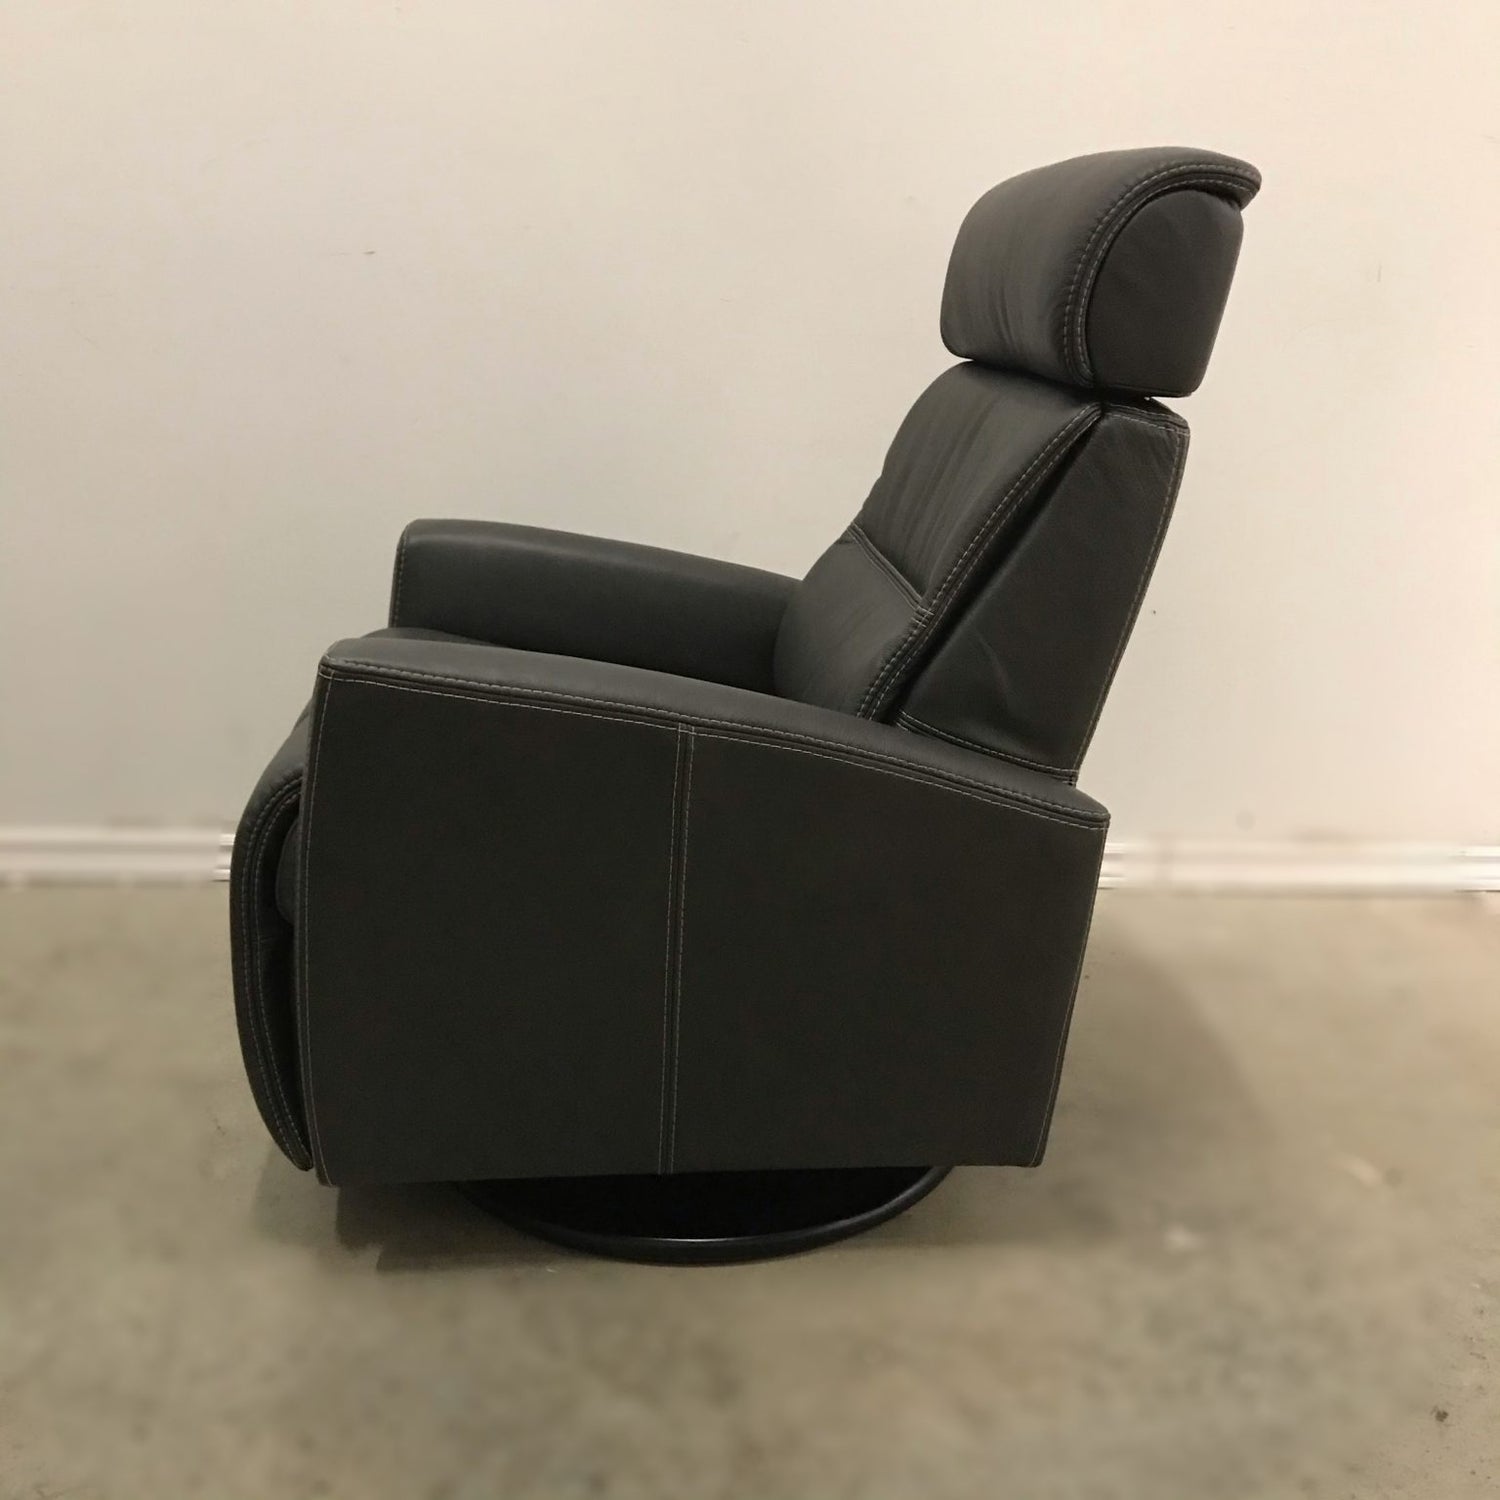 MILAN MOTORIZED RECLINER BY FJORDS